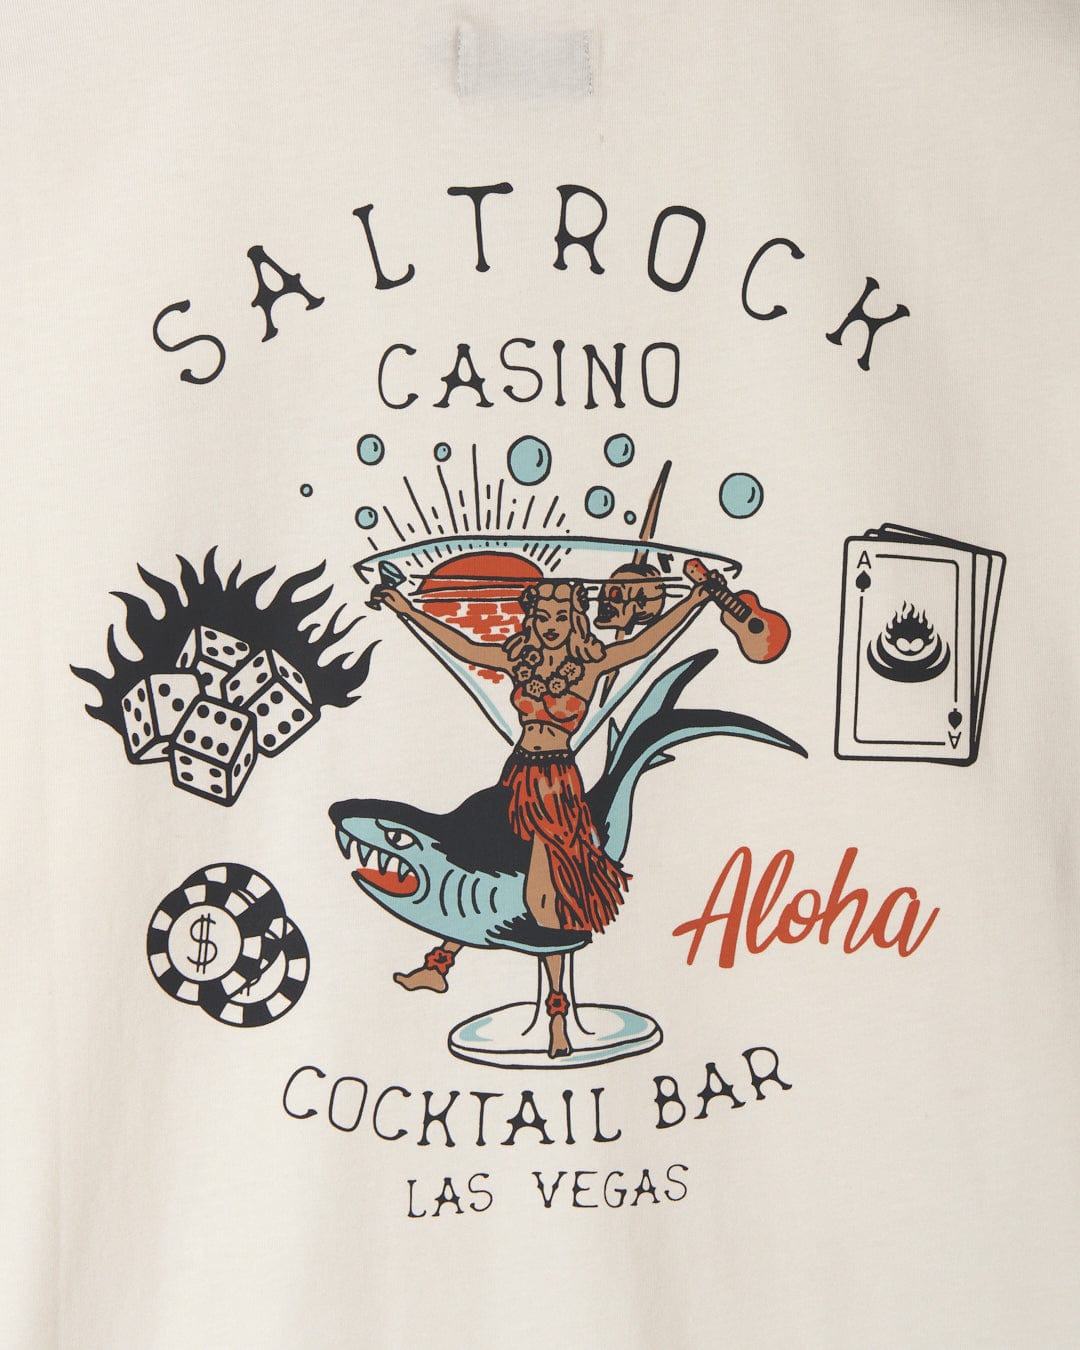 Graphic print on a crew neckline t-shirt featuring Vegas Cocktail - Mens Short Sleeve T-Shirt - White by Saltrock, a cocktail glass with a shark, dice, playing cards, and the word "aloha.